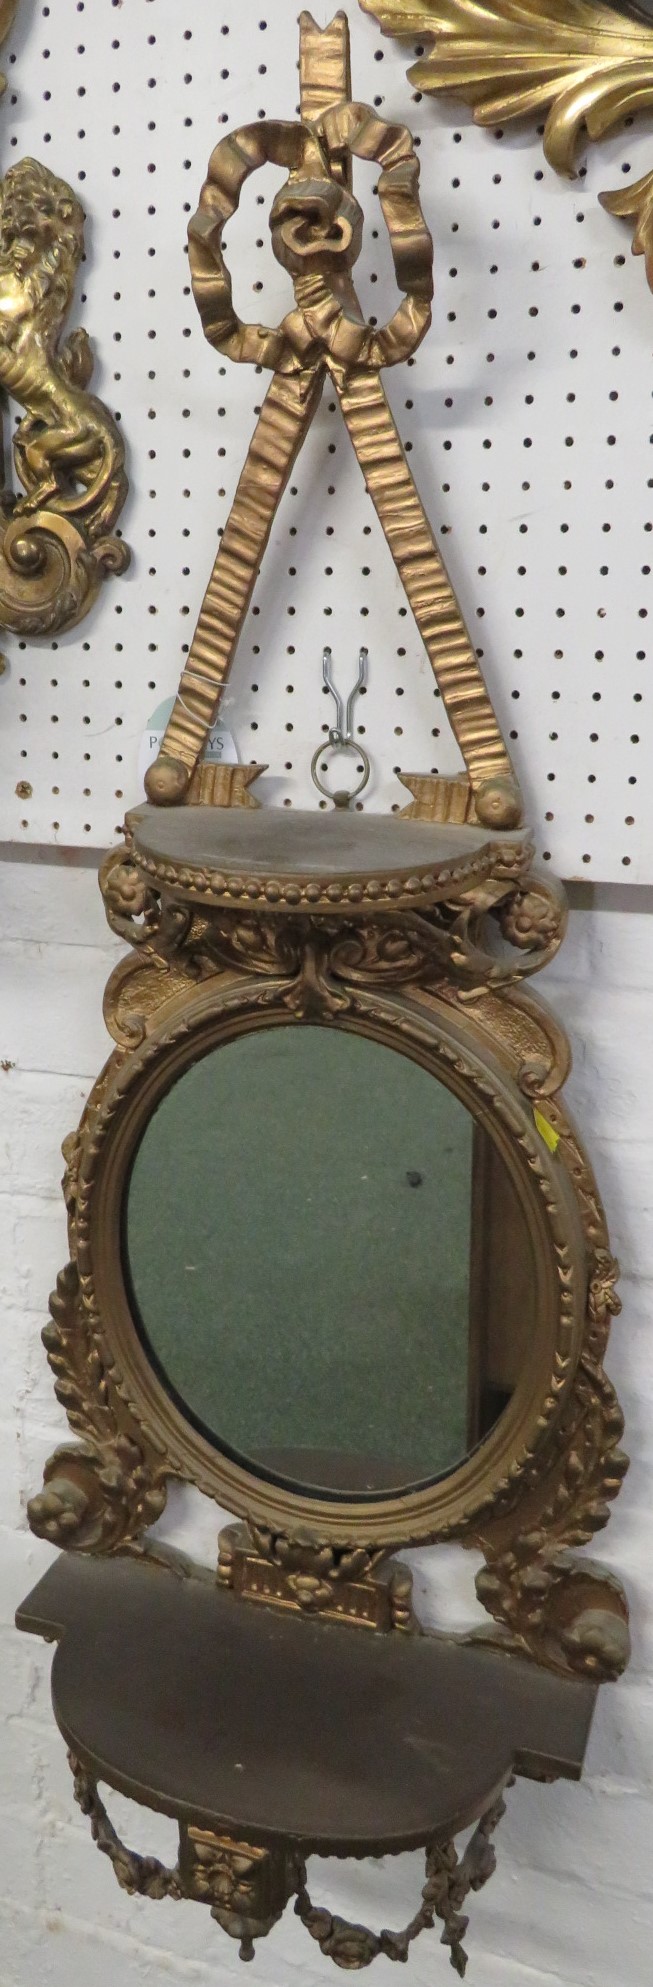 Gilt wood wall bracket with oval mirror and a shelf above and below, carved acanthus and swags and a